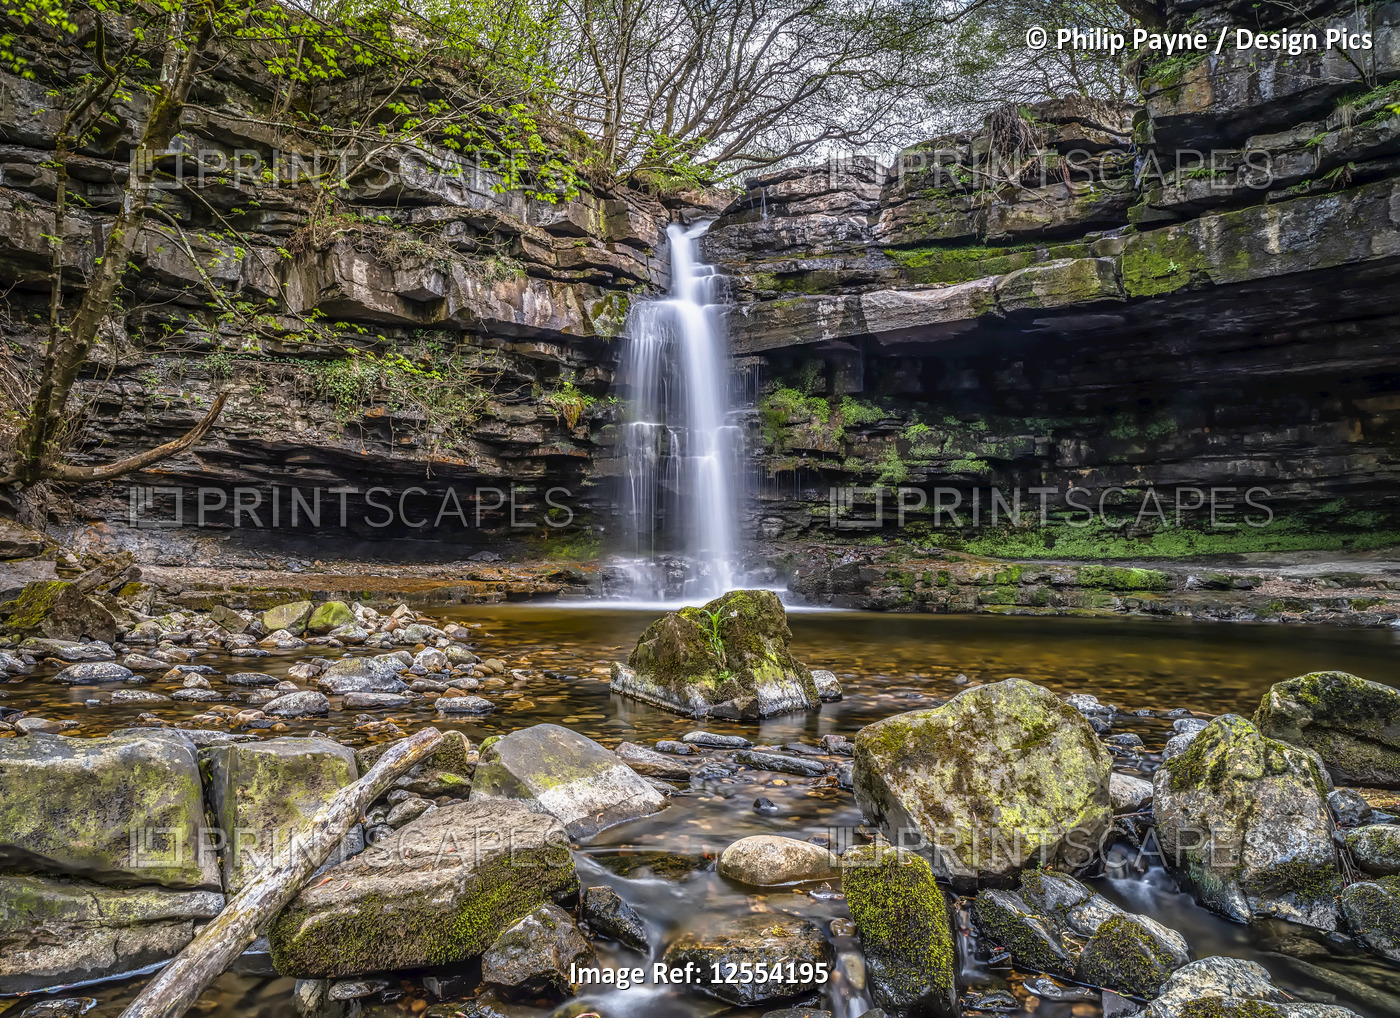 Summerhill Force is a picturesque waterfall in a wooded glade in Upper ...